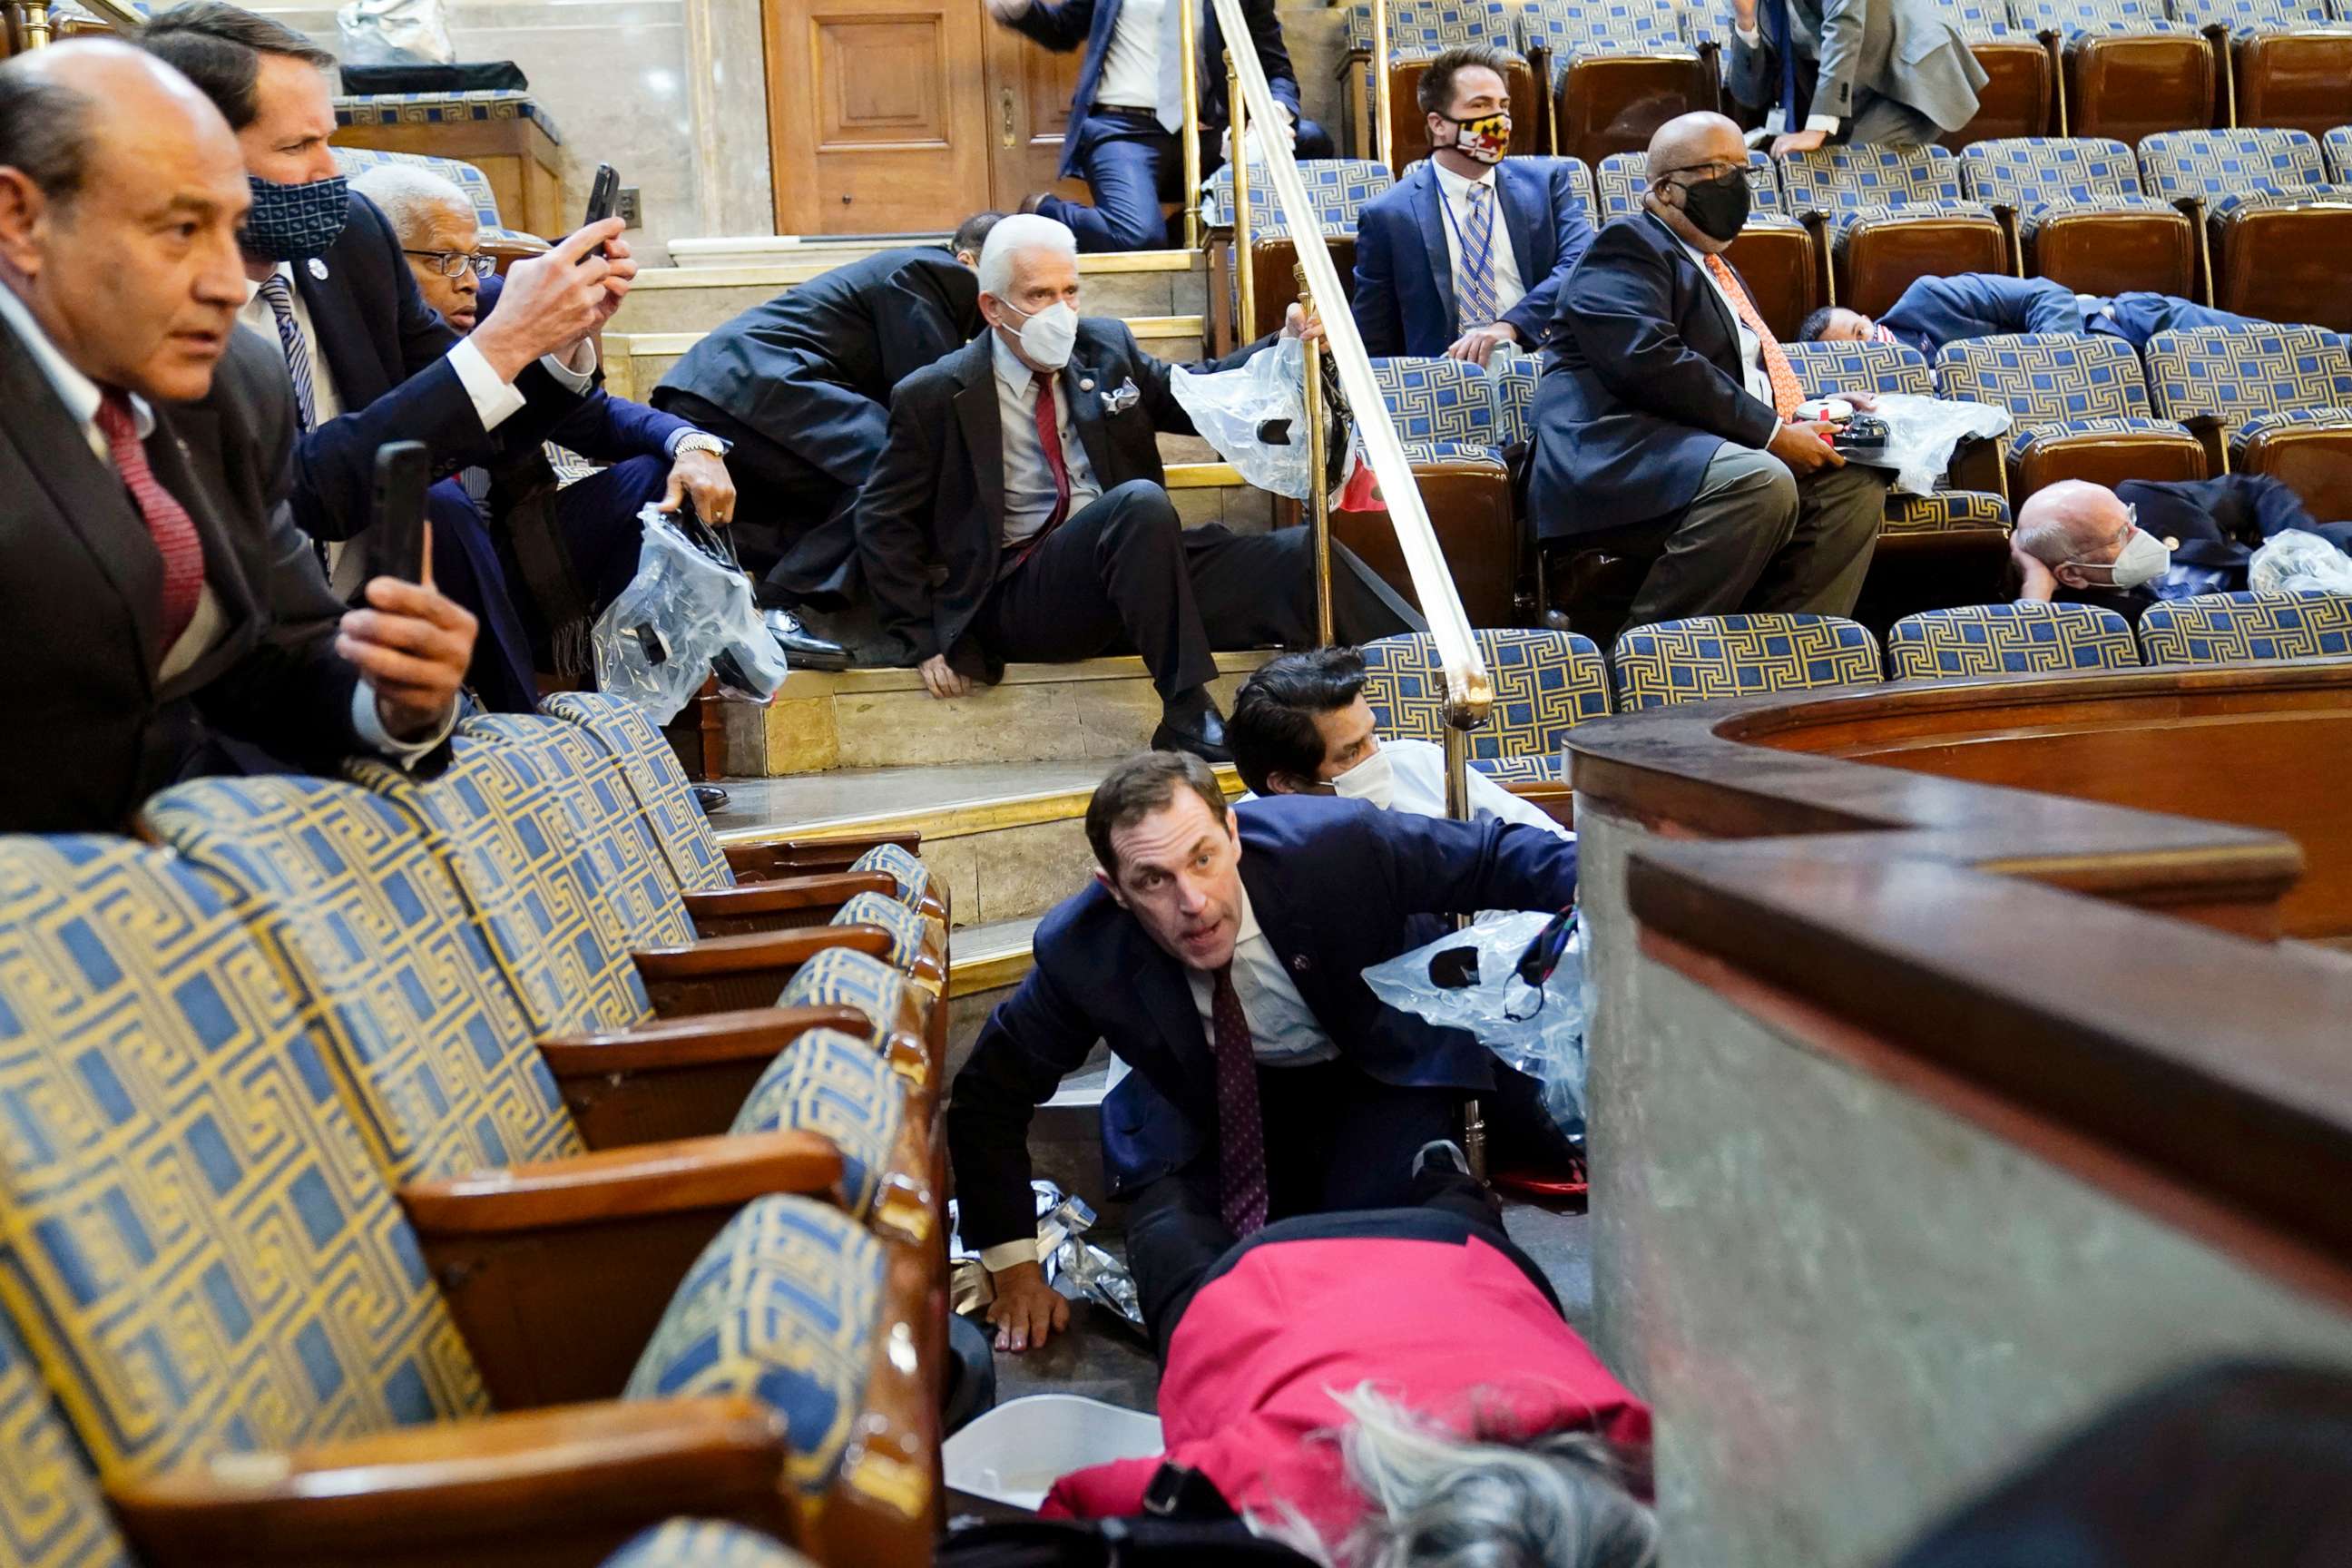 PHOTO: People shelter in the House gallery as rioters try to break into the House Chamber at the U.S. Capitol, Jan. 6, 2021, in Washington.